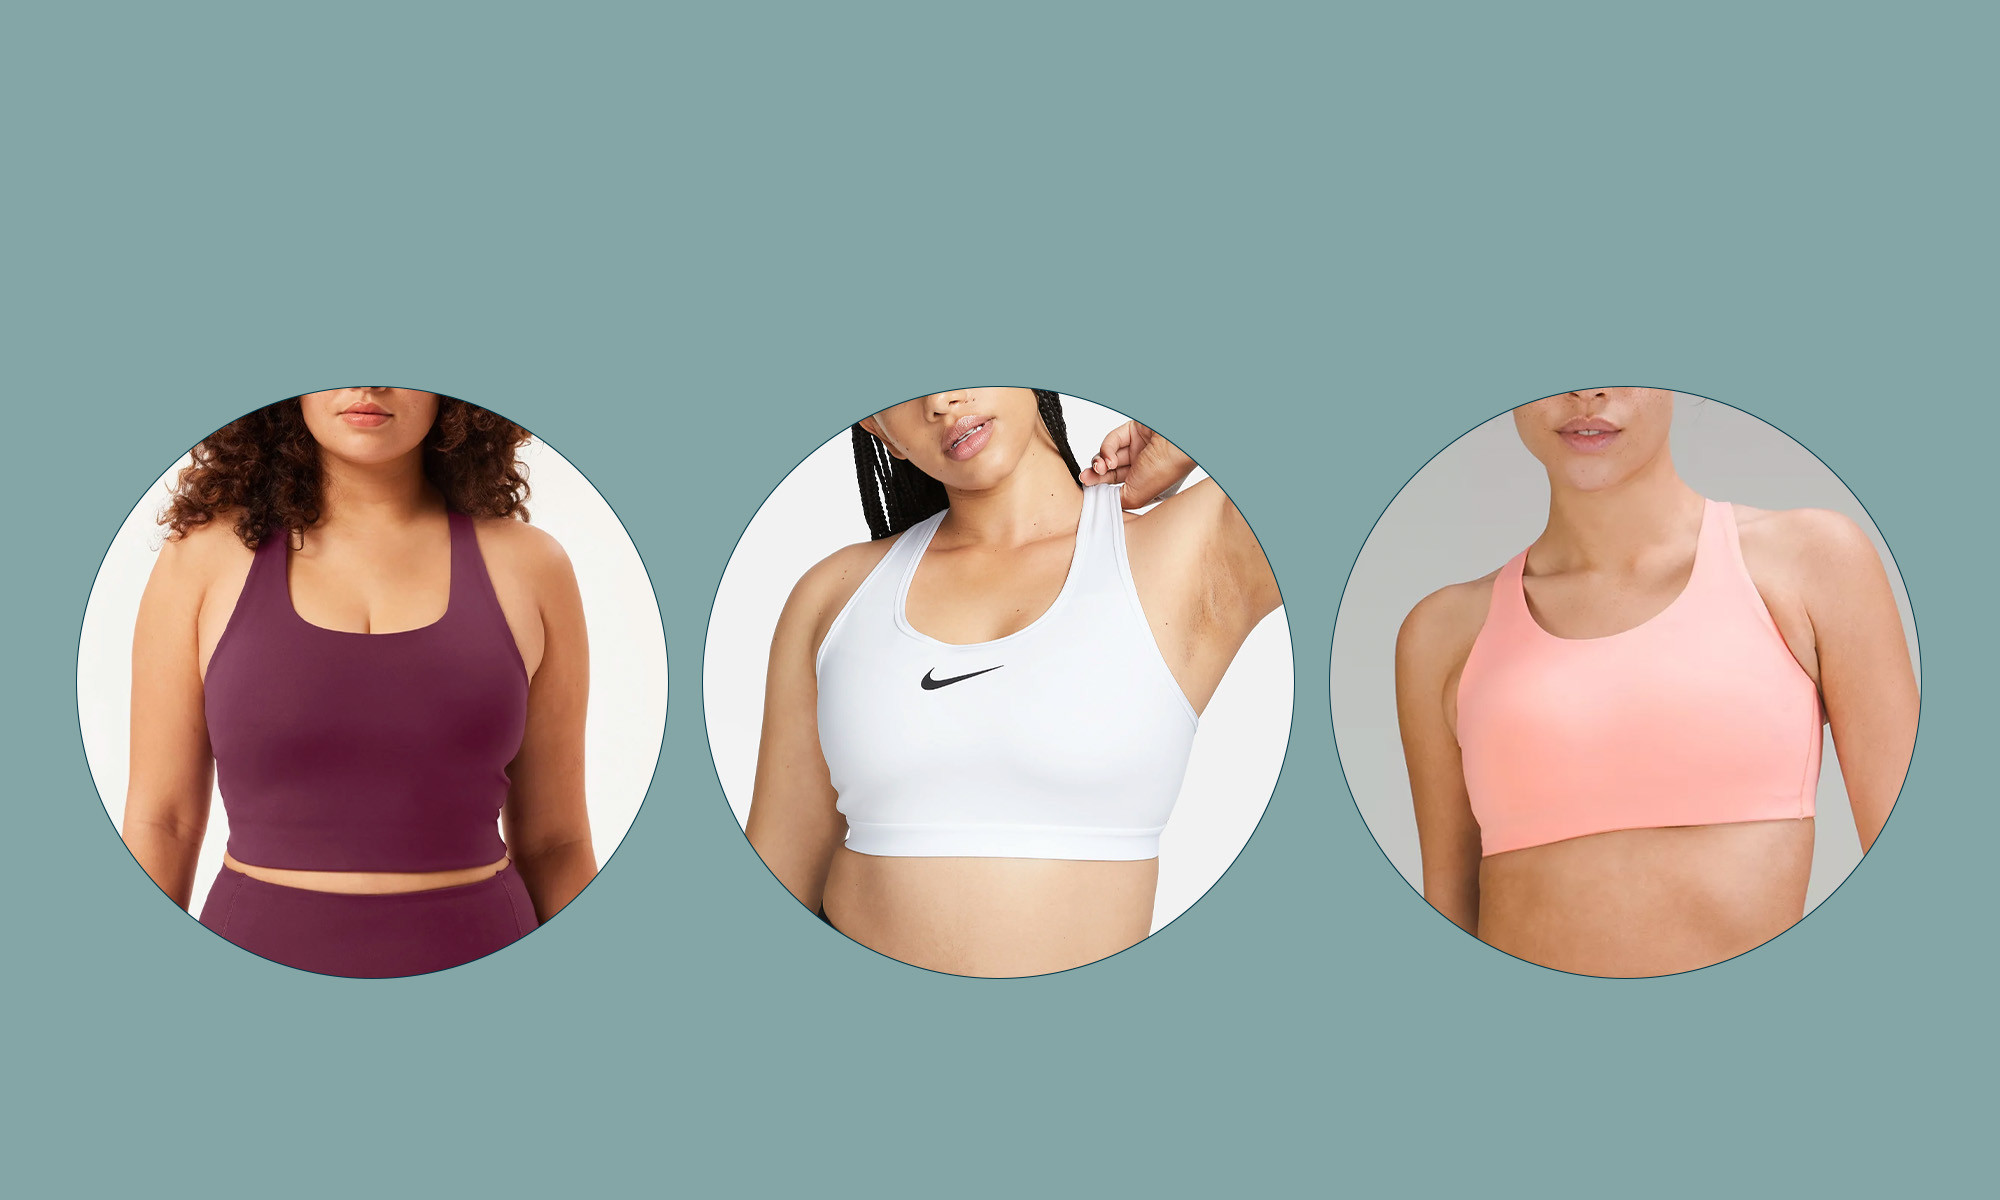 These Instructor-Approved Sports Bras Offer Optimal Support Without Restriction